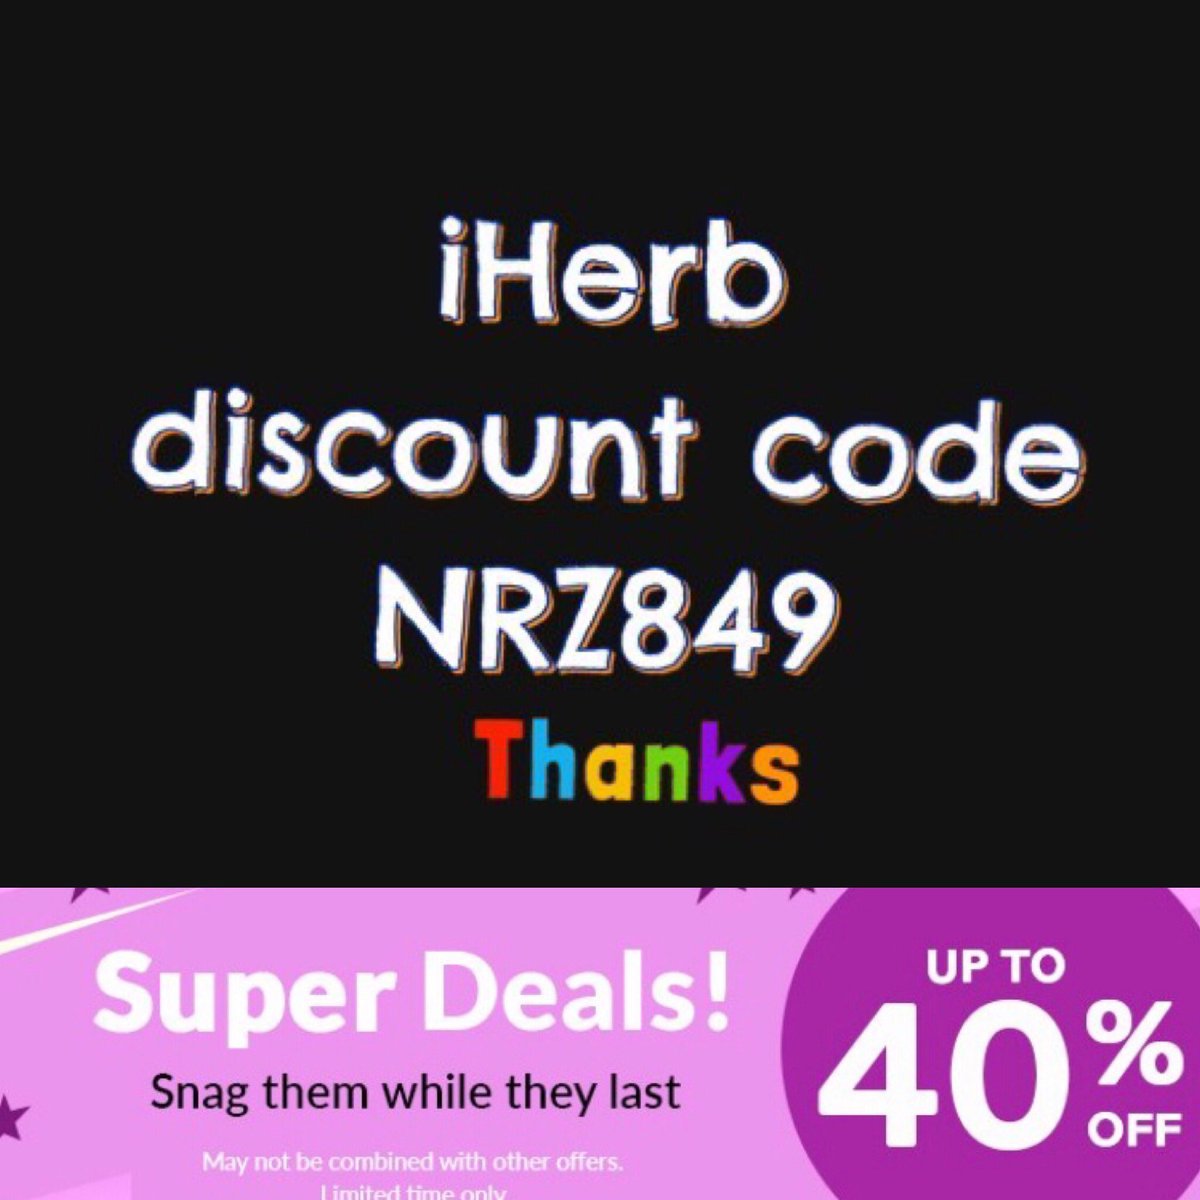 How To Improve At iherb coupon code 10 off In 60 Minutes